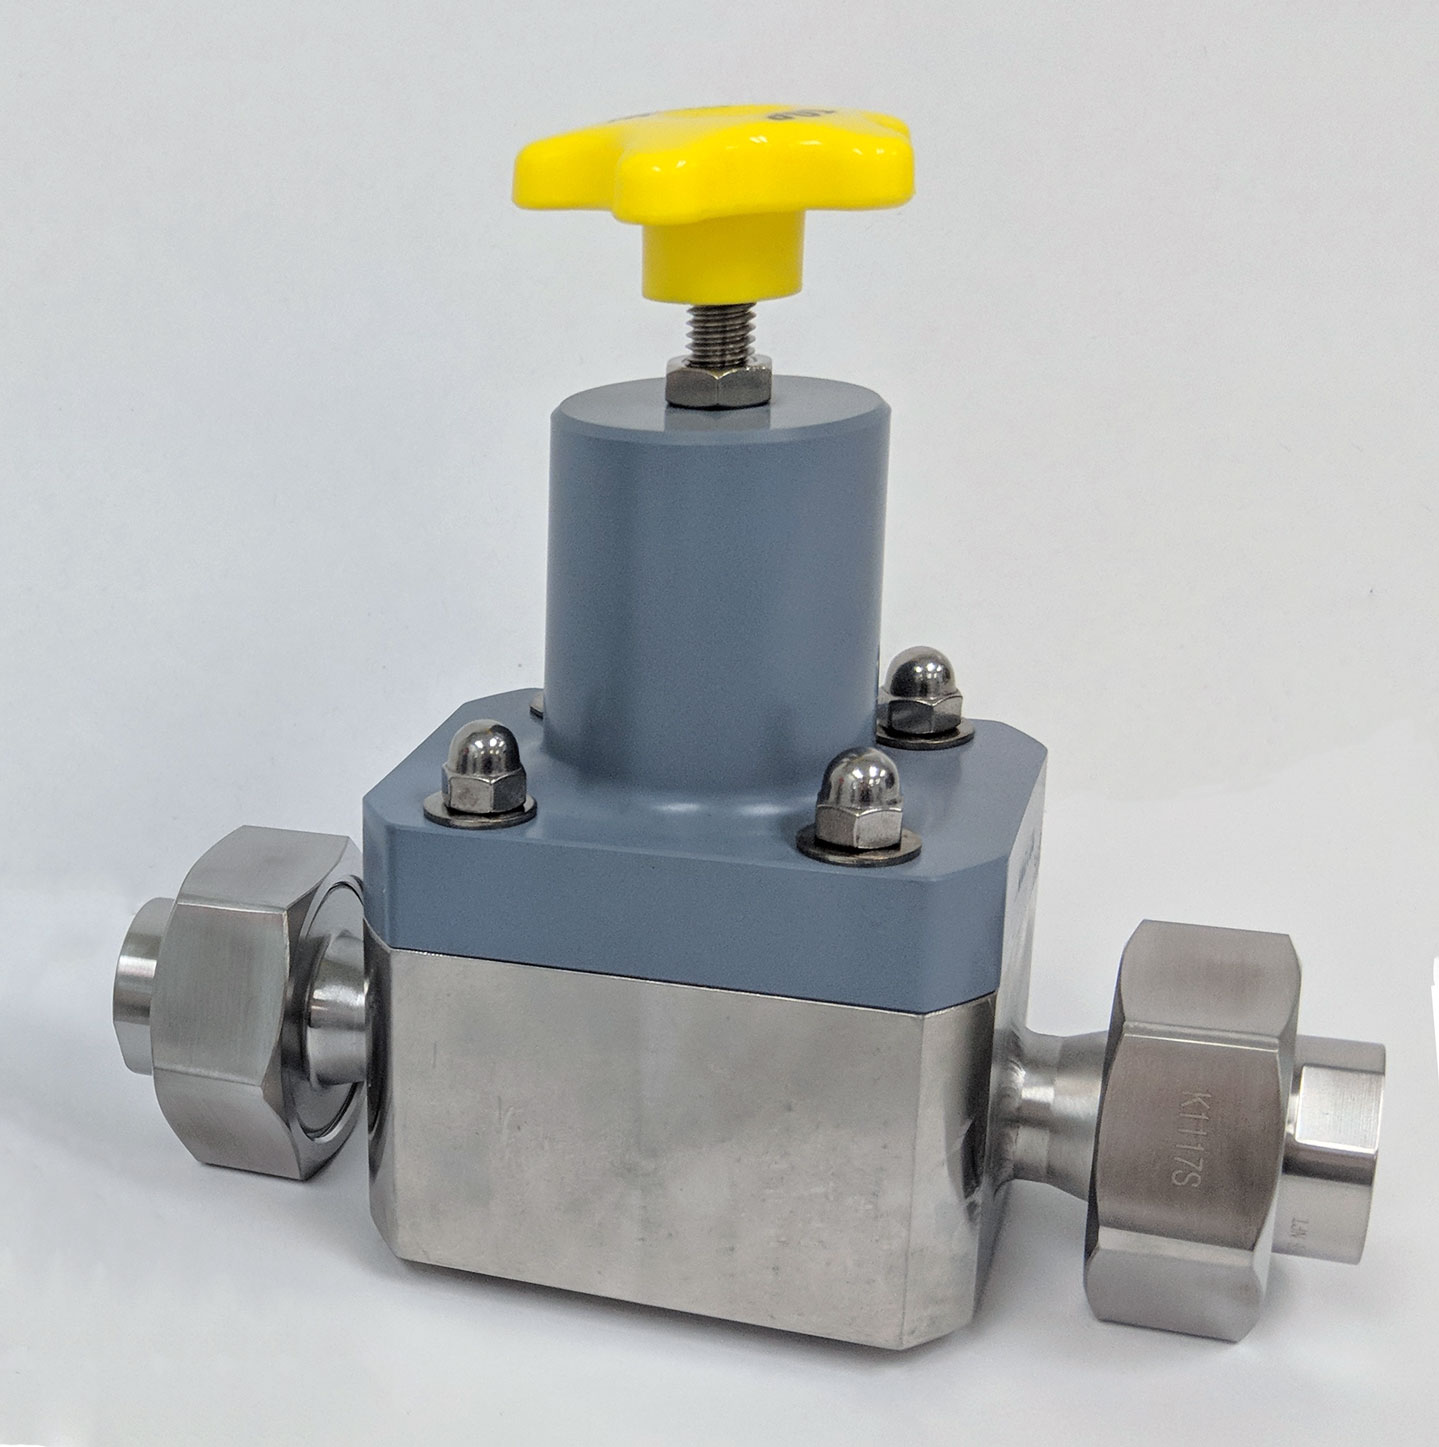 Top Valve Union Connection Valve in Stainless Steel